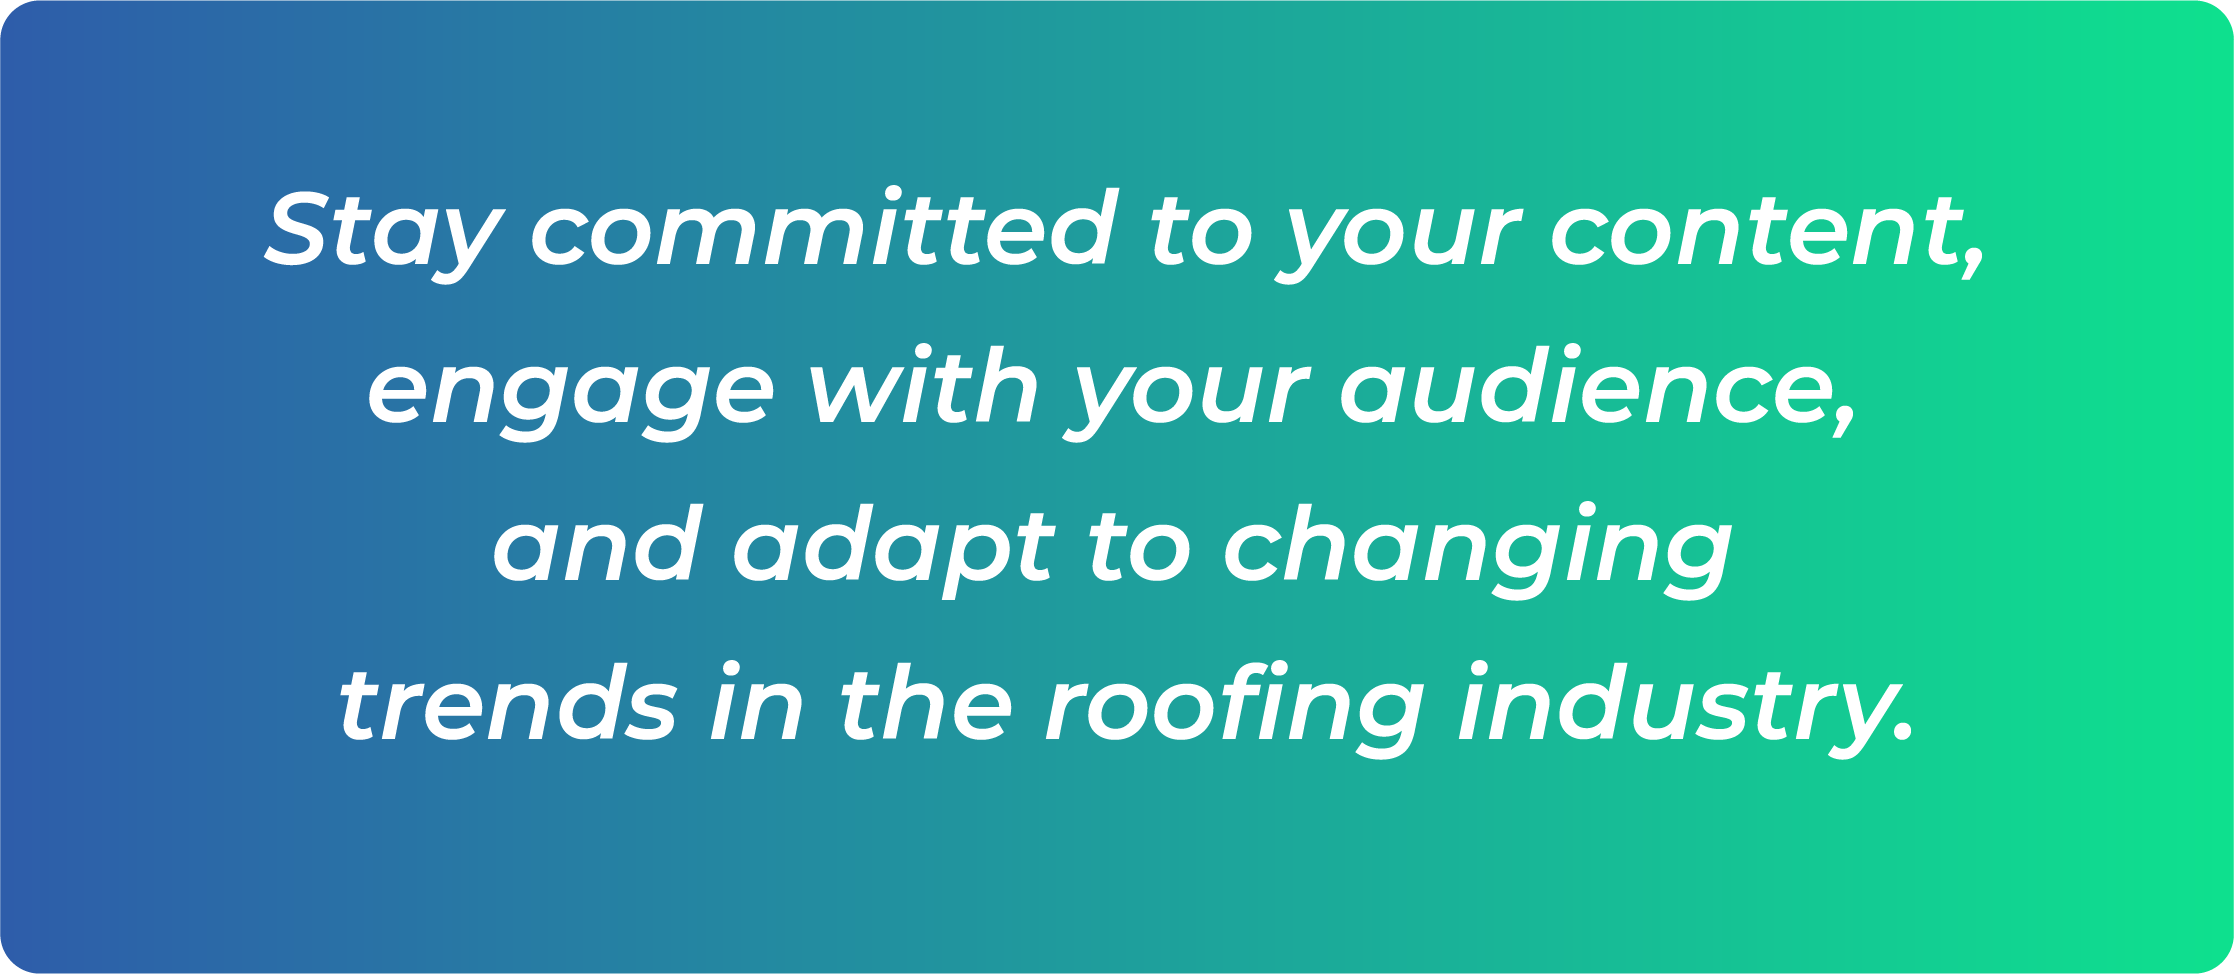 Stay committed to your content, engage with your audience, and adapt to changing trends in the roofing industry.